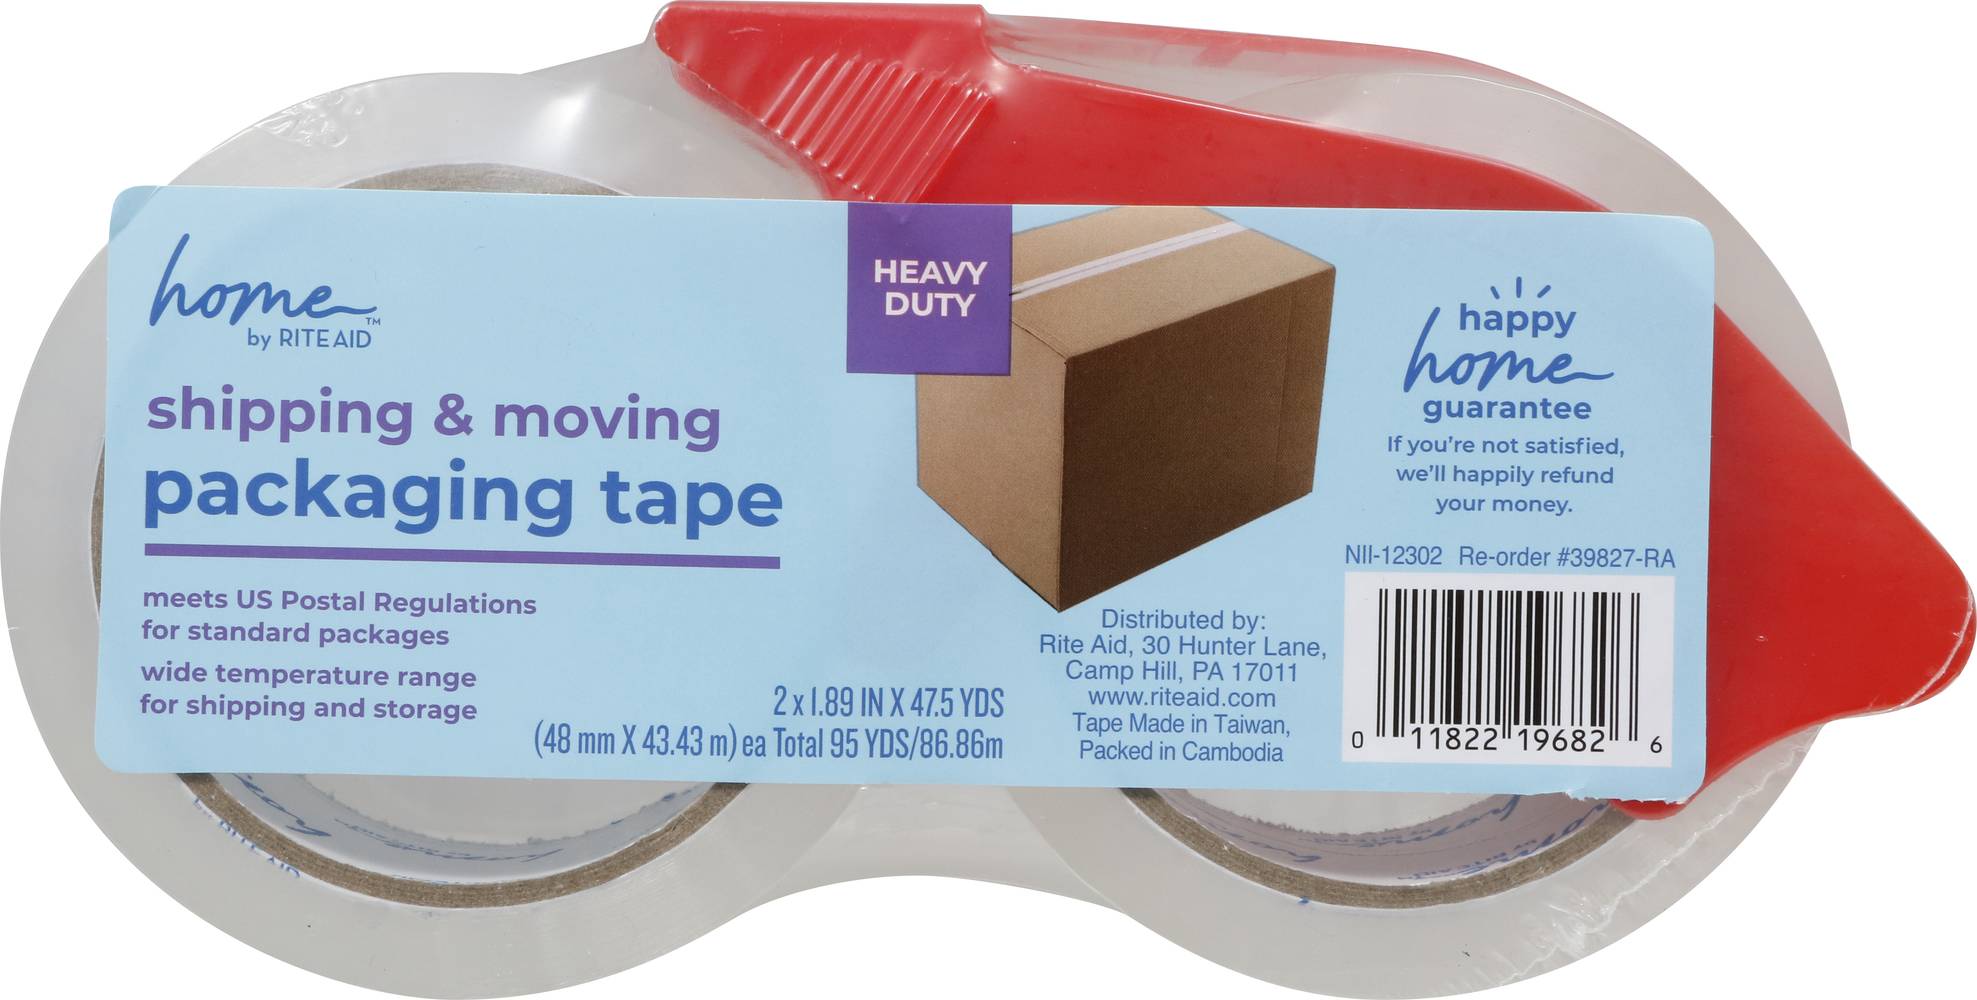 Rite Aid Home Shipping &Moving Packaging Tape (95 yds /86.86m)